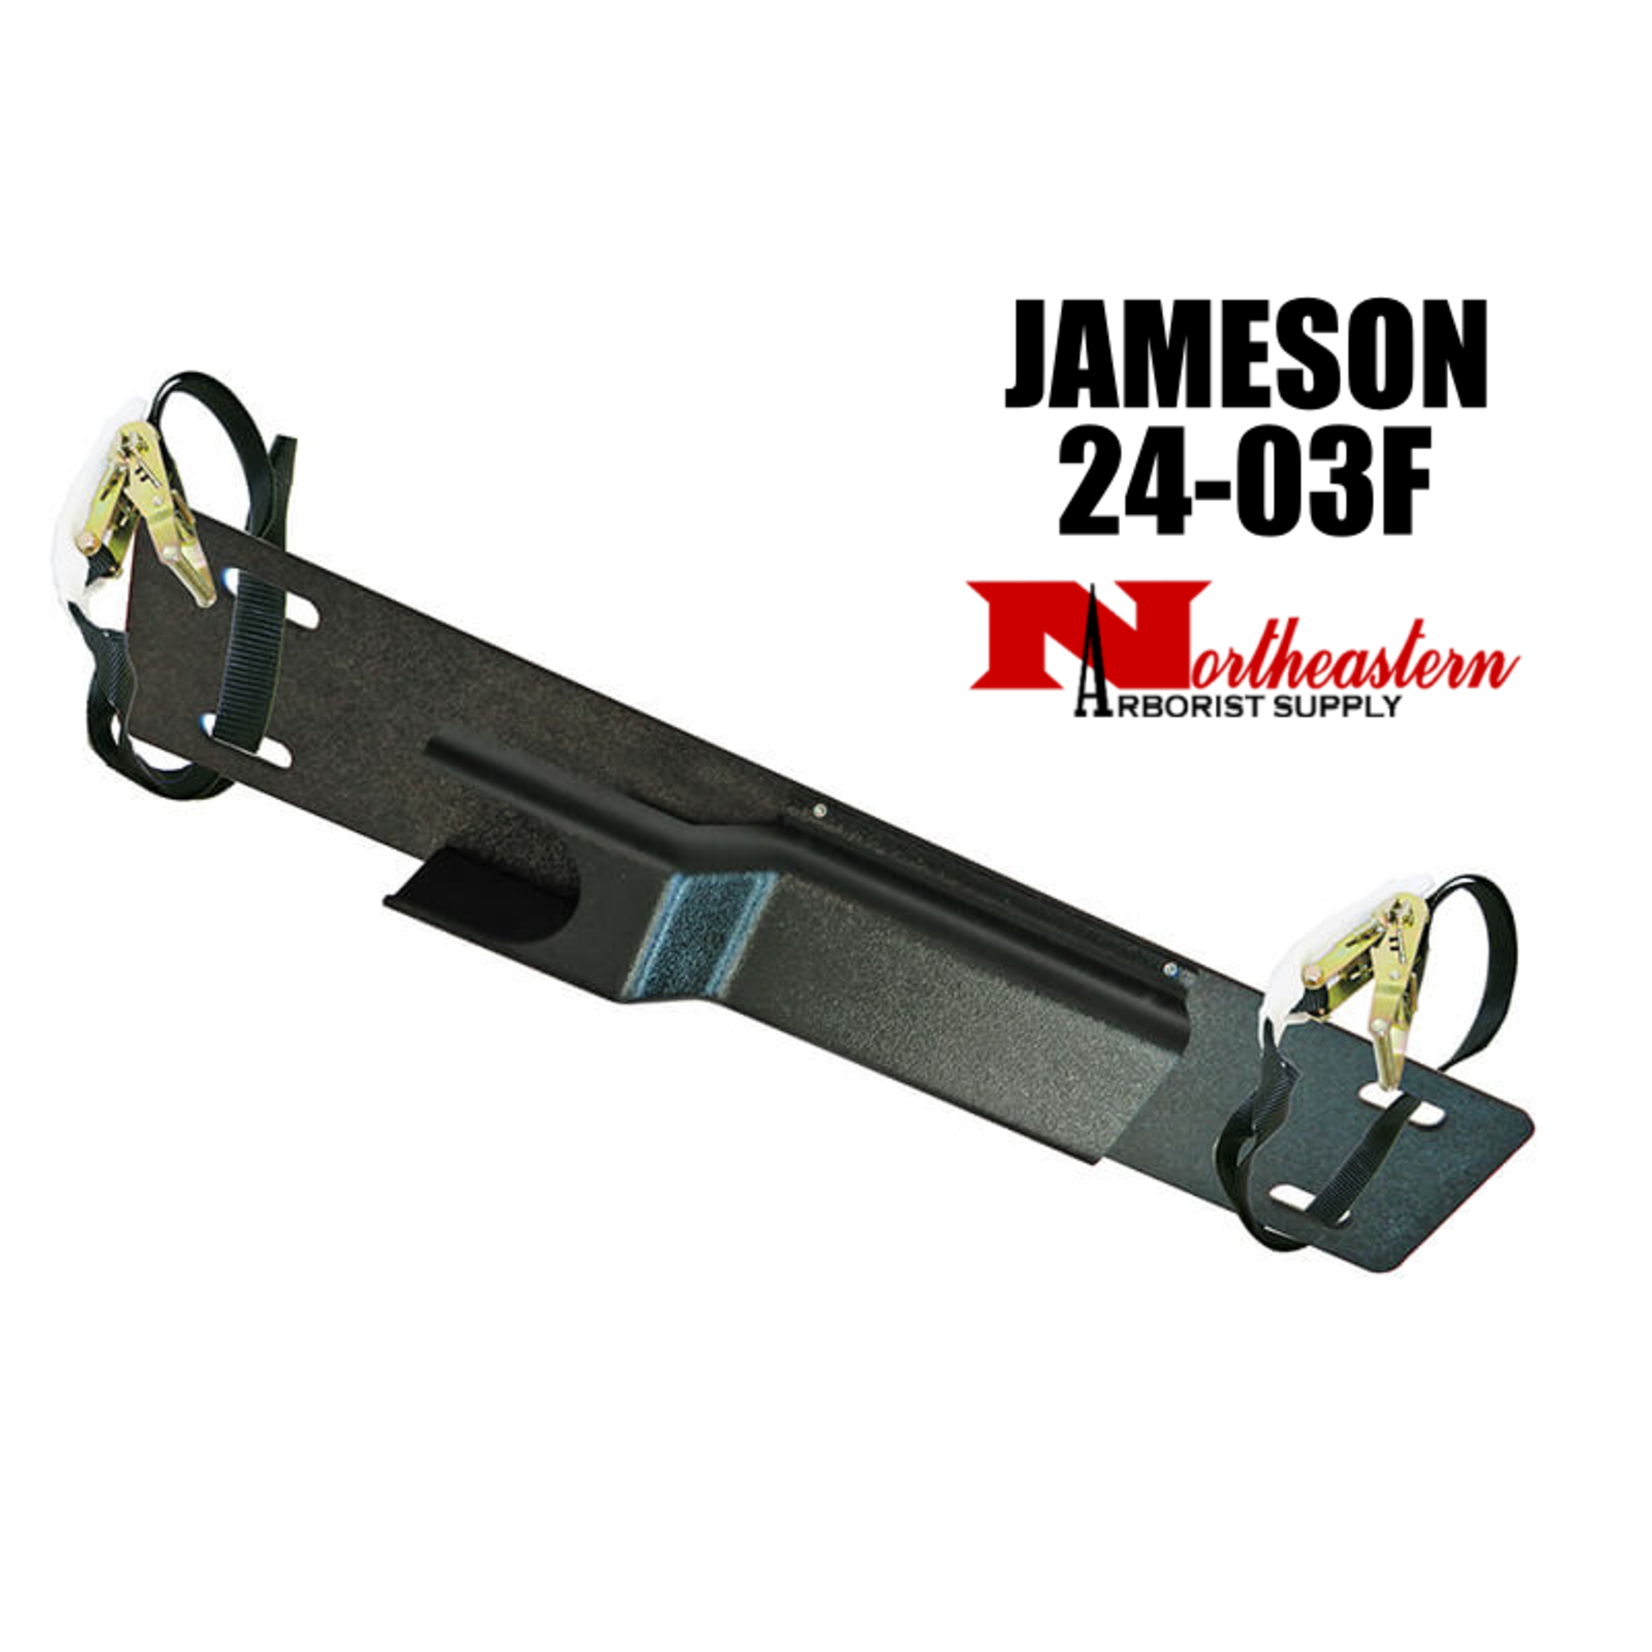 Jameson Long Reach Chain Saw Holder With Ratchet Straps And Handle Holder. Mounts On Boom For Easy Access